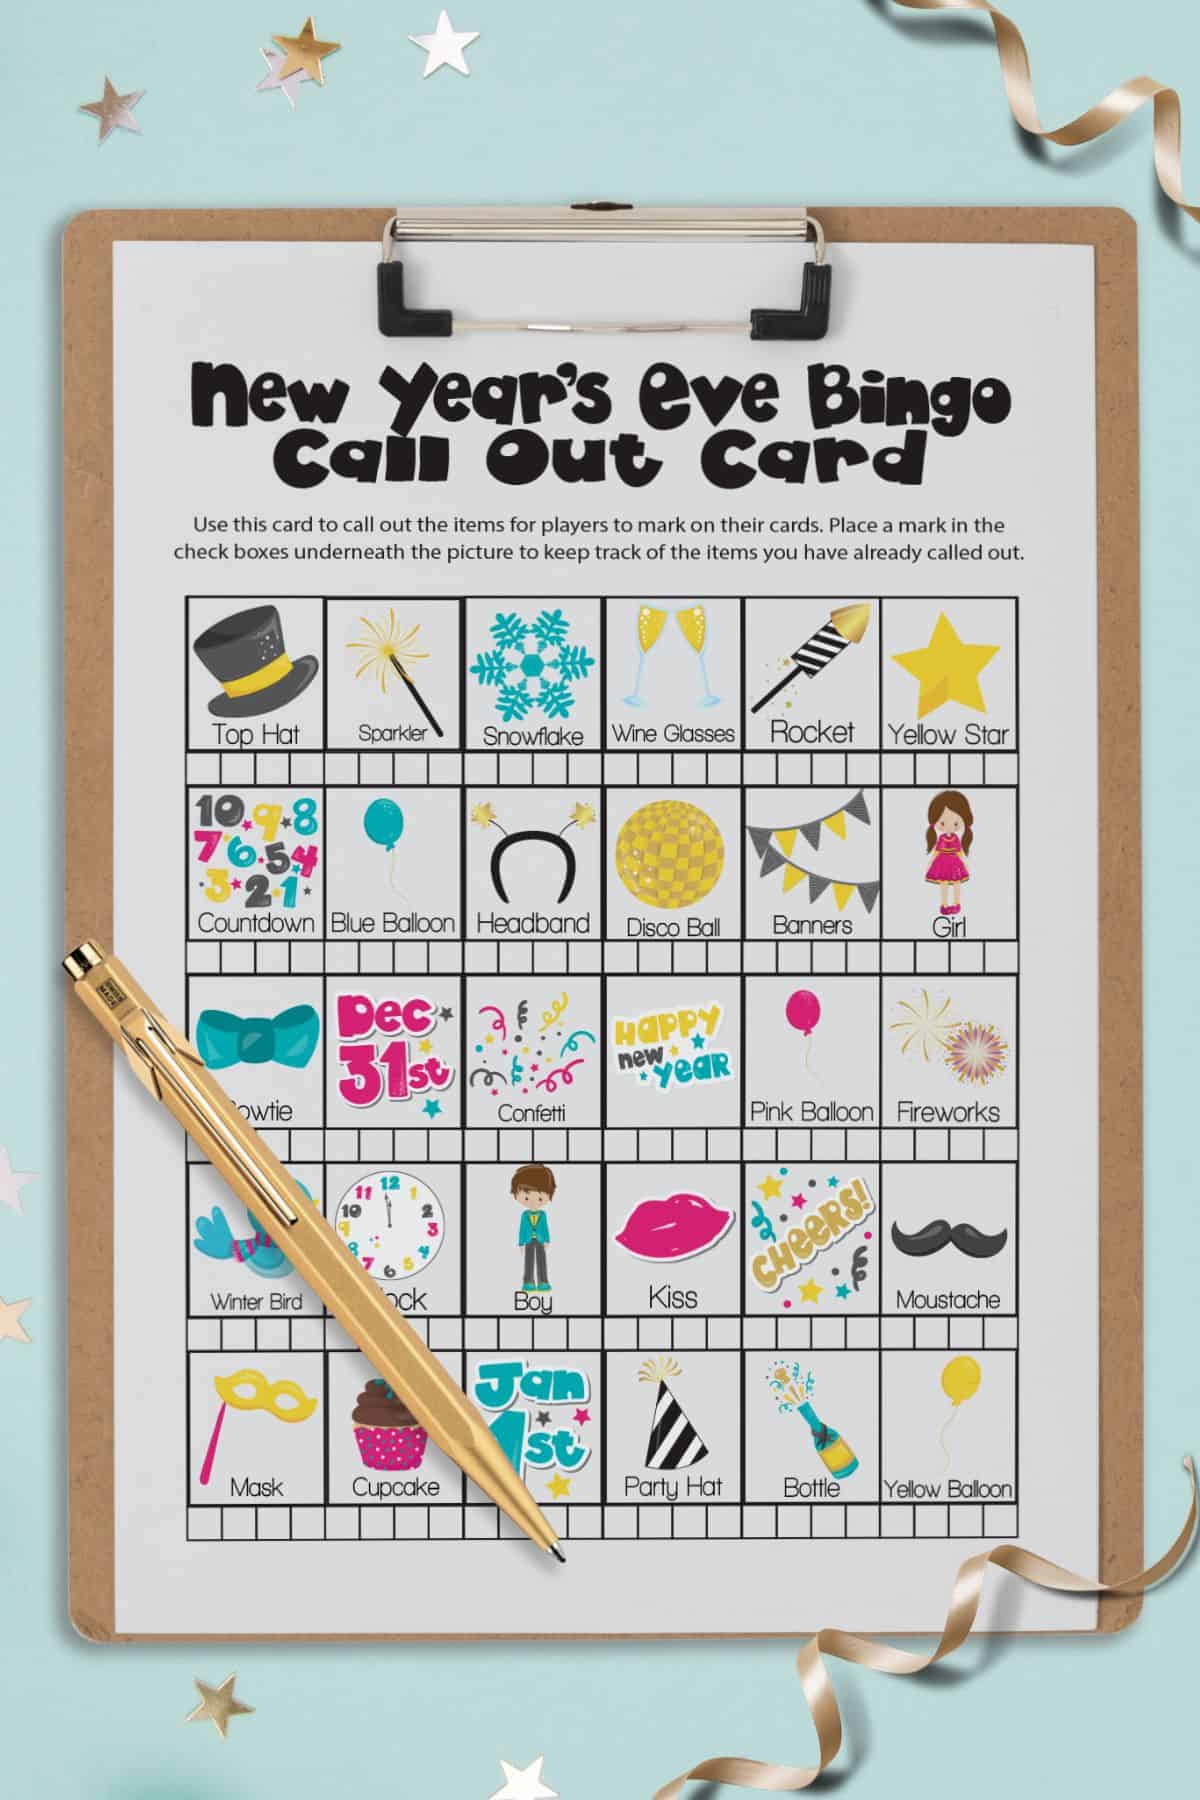 A clipboard with a Bingo call out card for New Year's Eve.